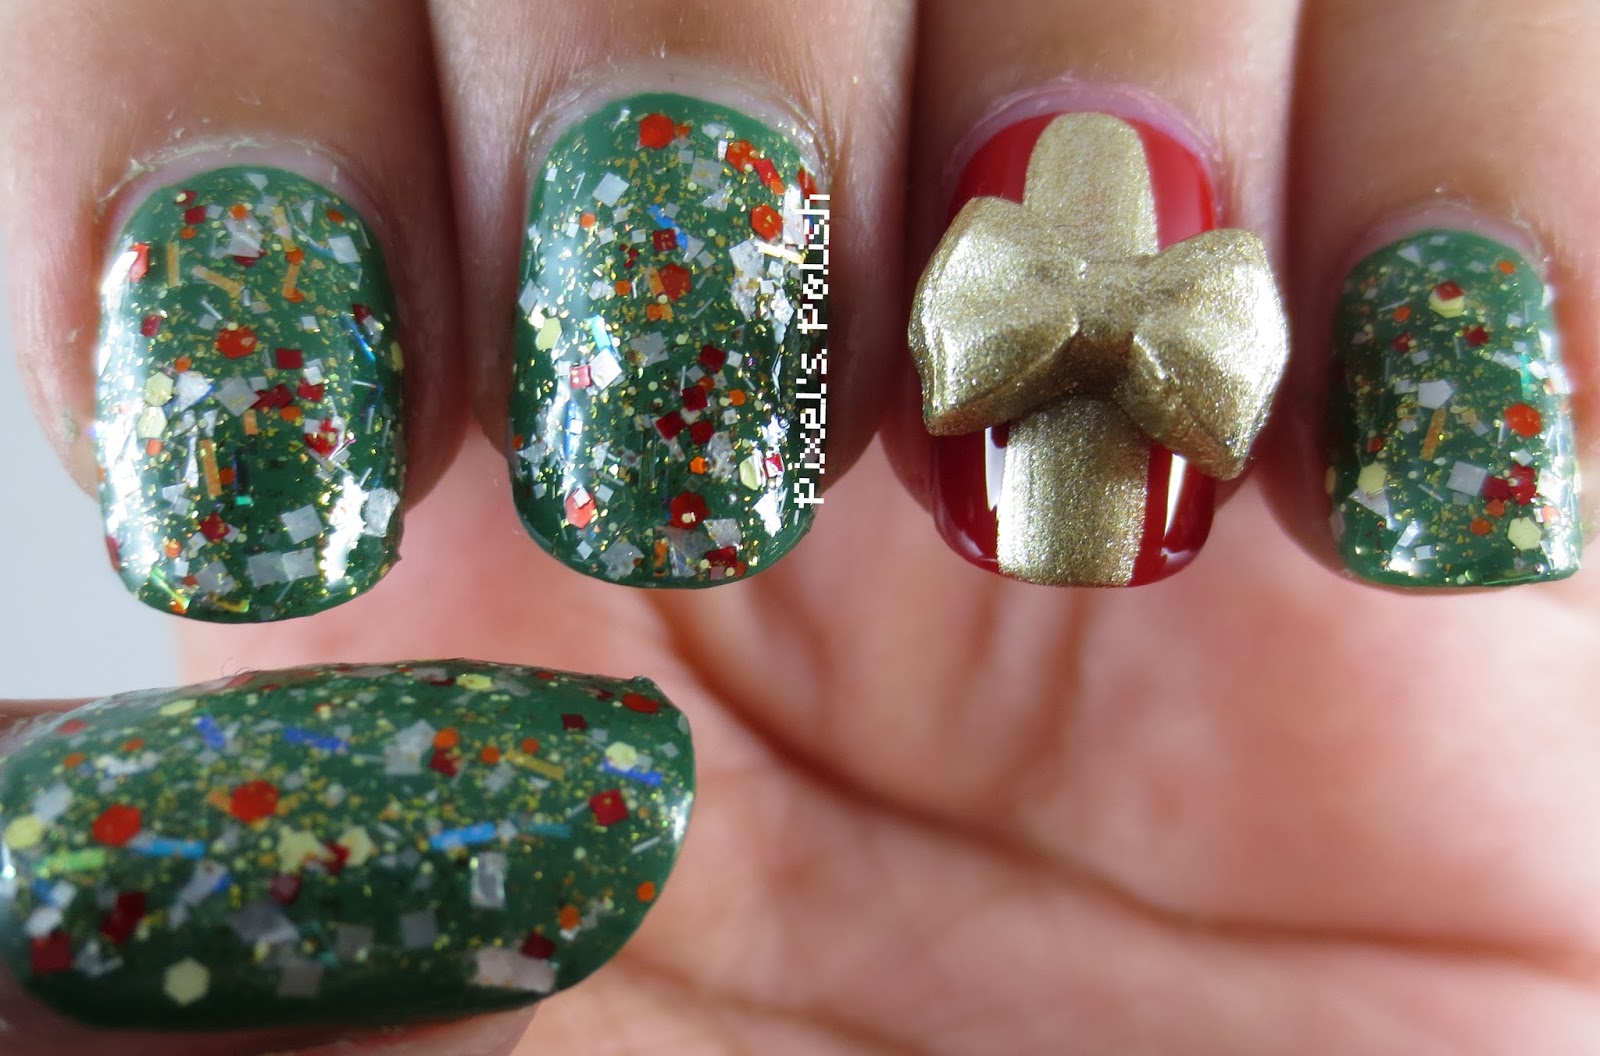 Pixel's Polish: Getting In The Holiday Spirit!